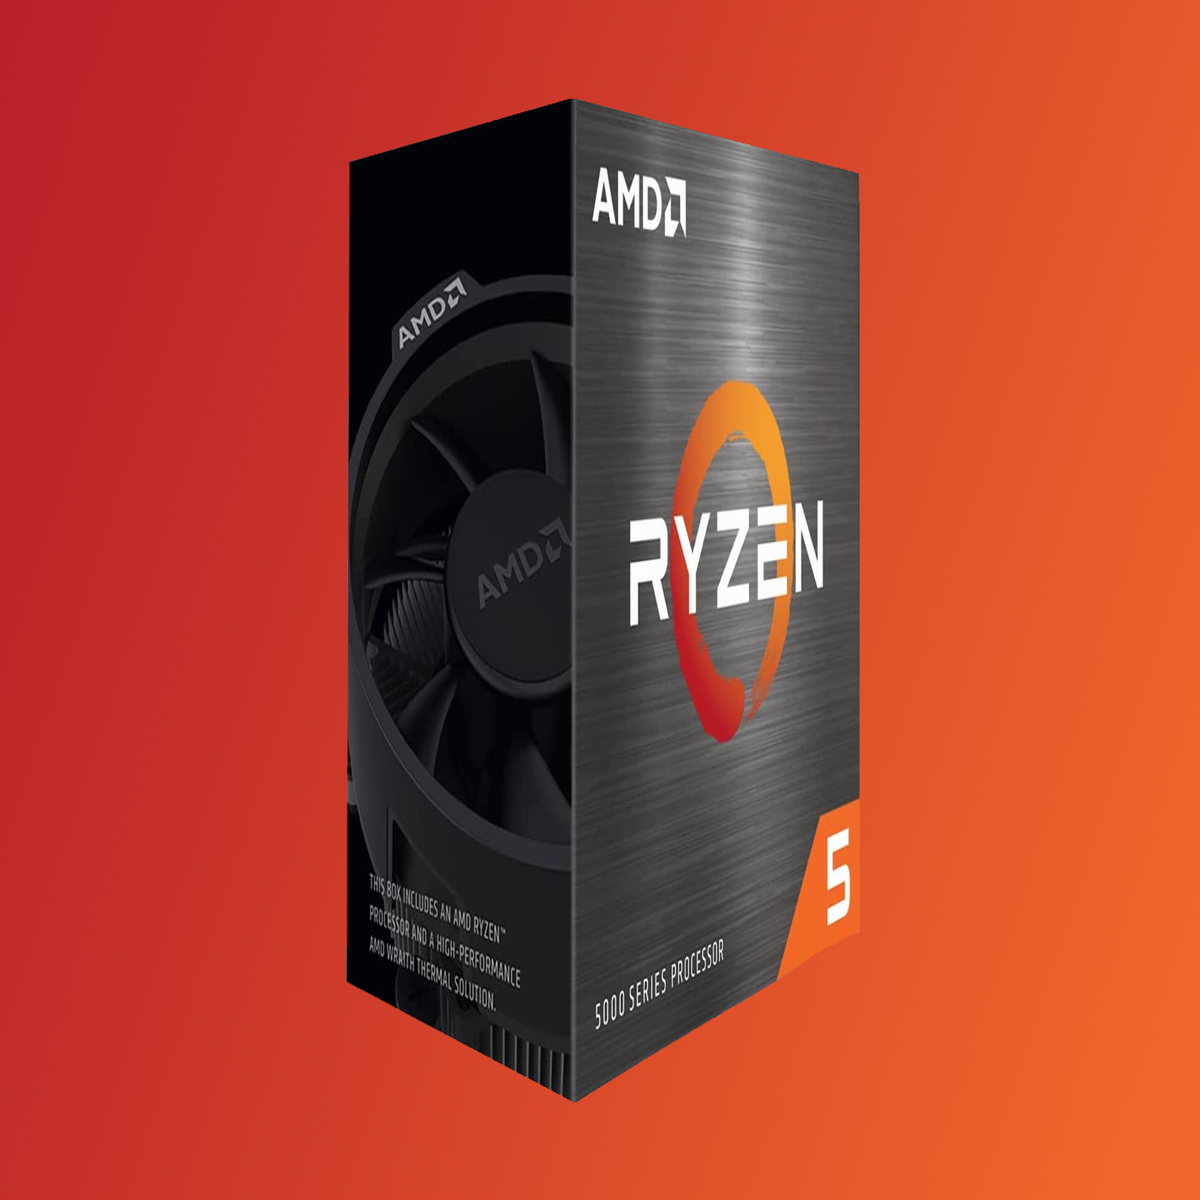 This AMD Ryzen 5 5600G with a free cooler is down to £105 with an   discount code